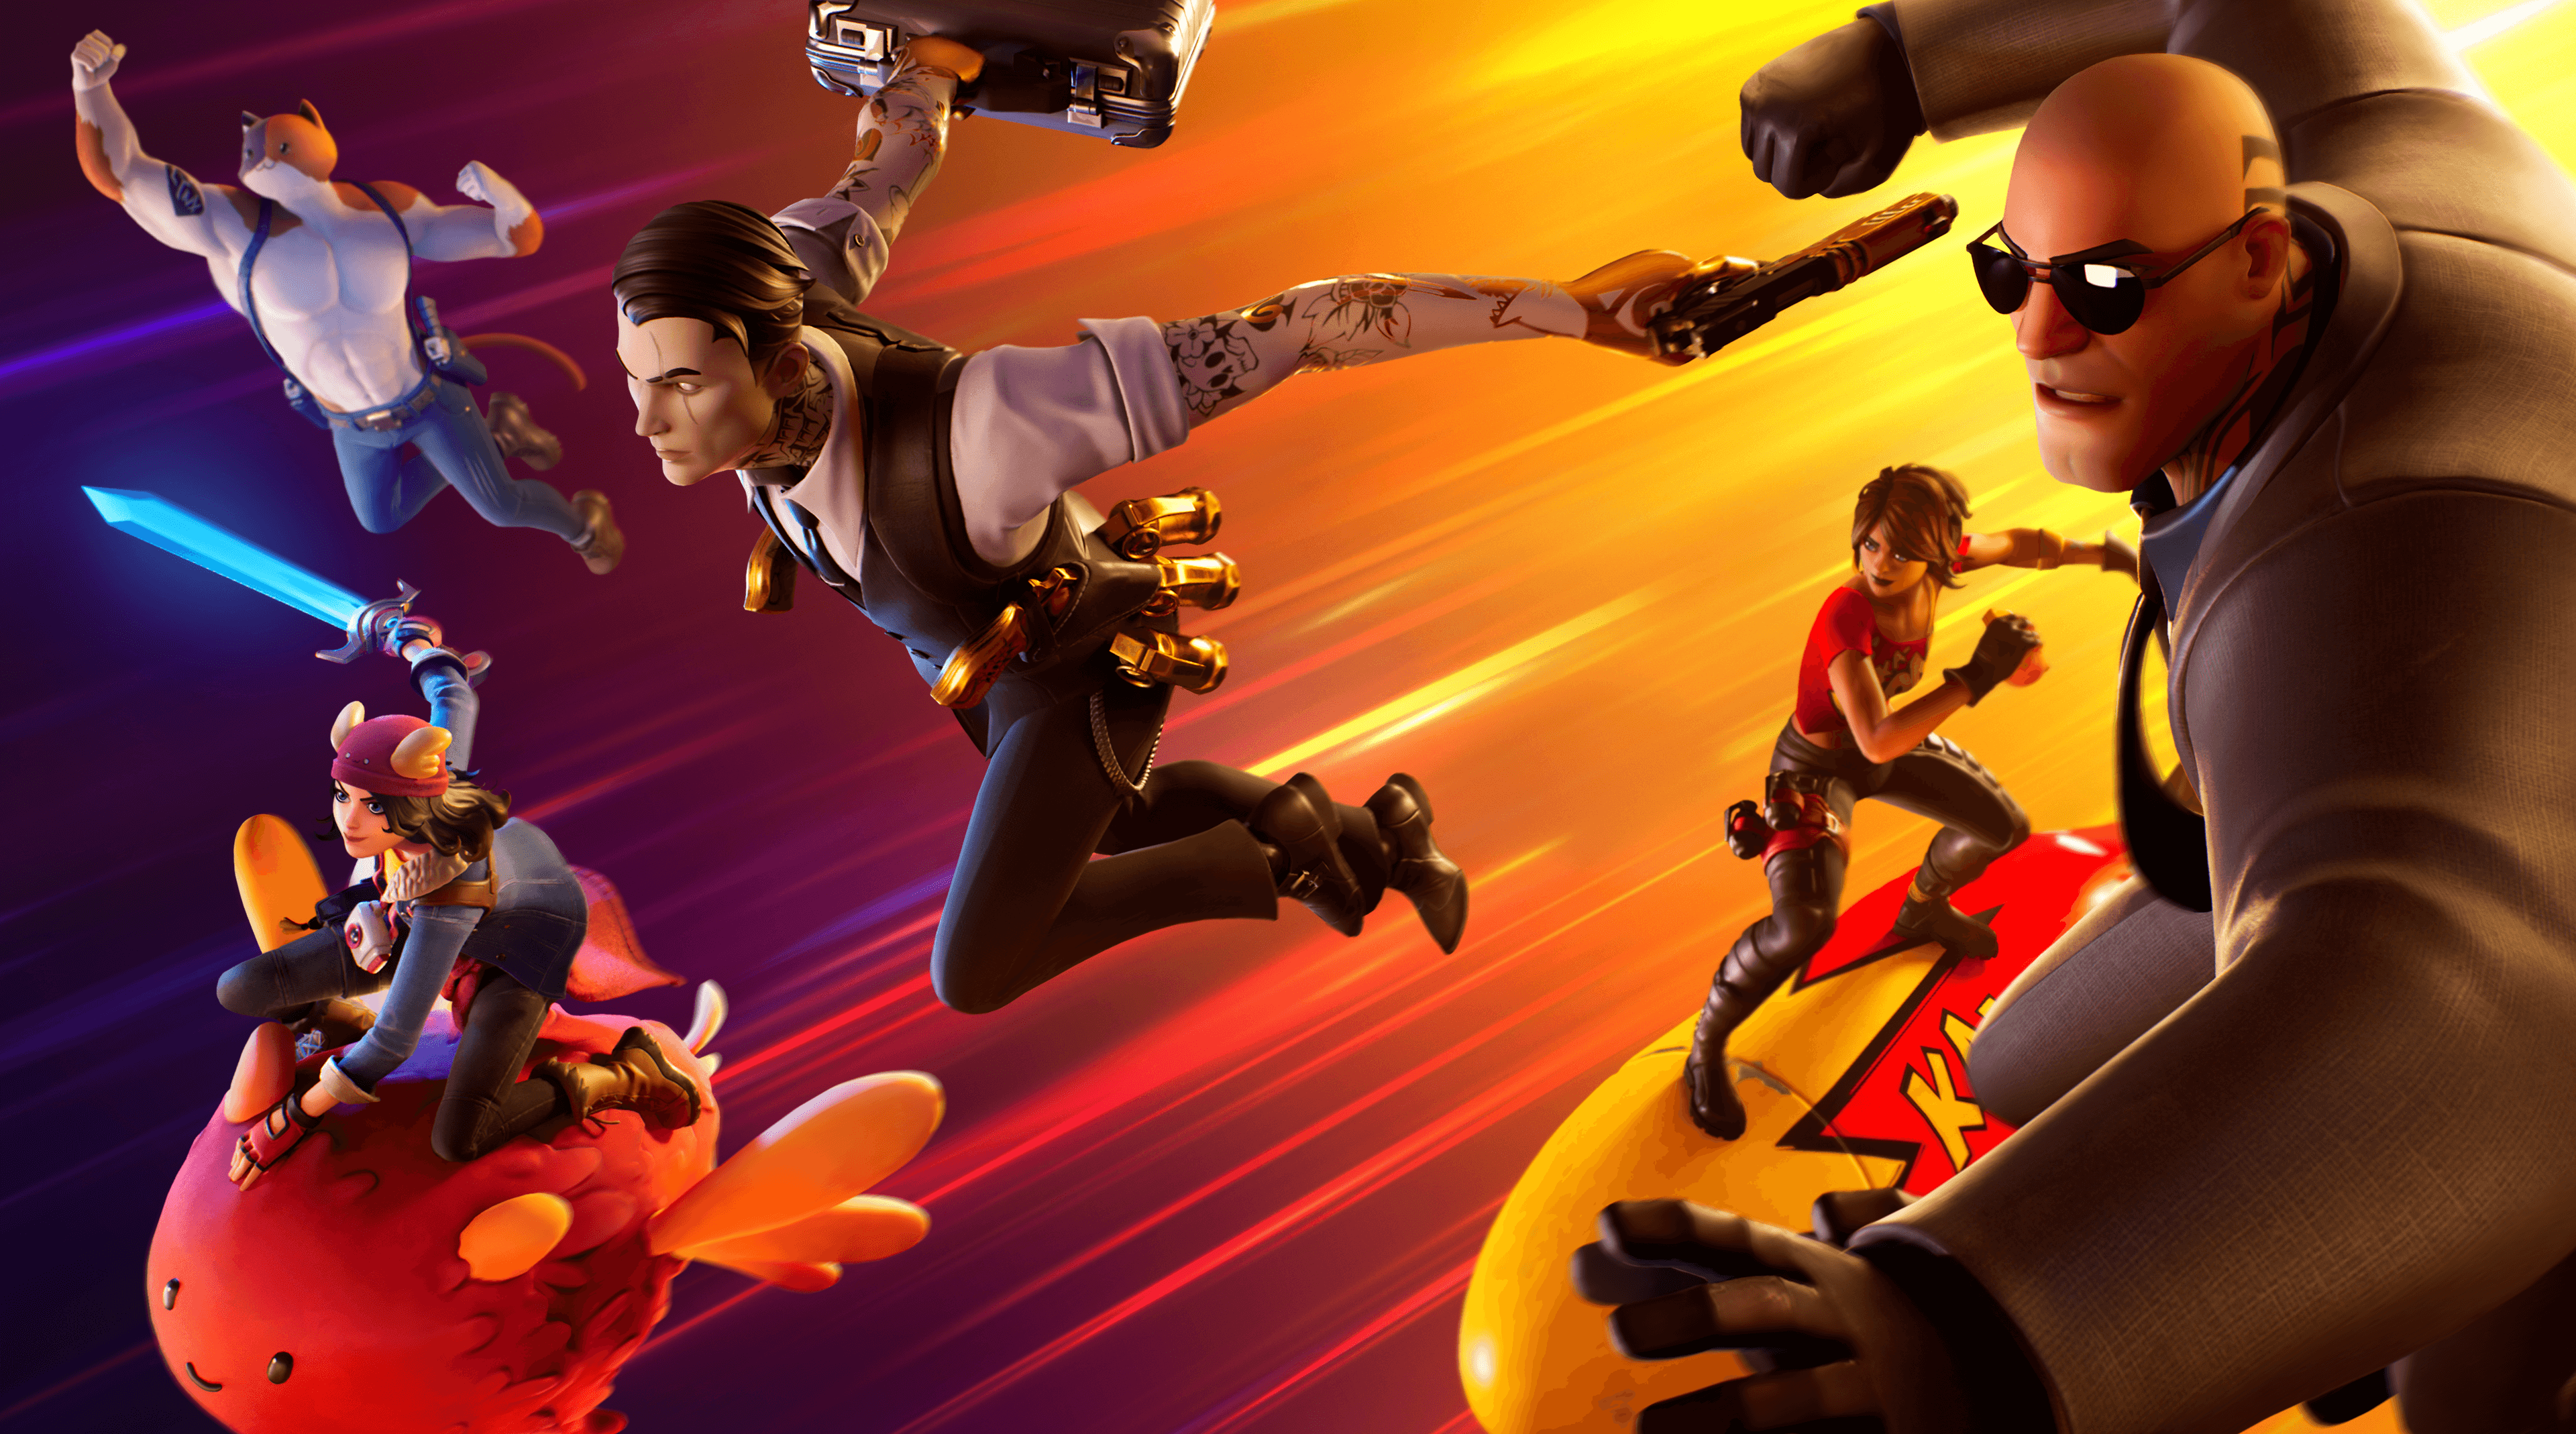 Fortnite Chapter 2 Wallpapers